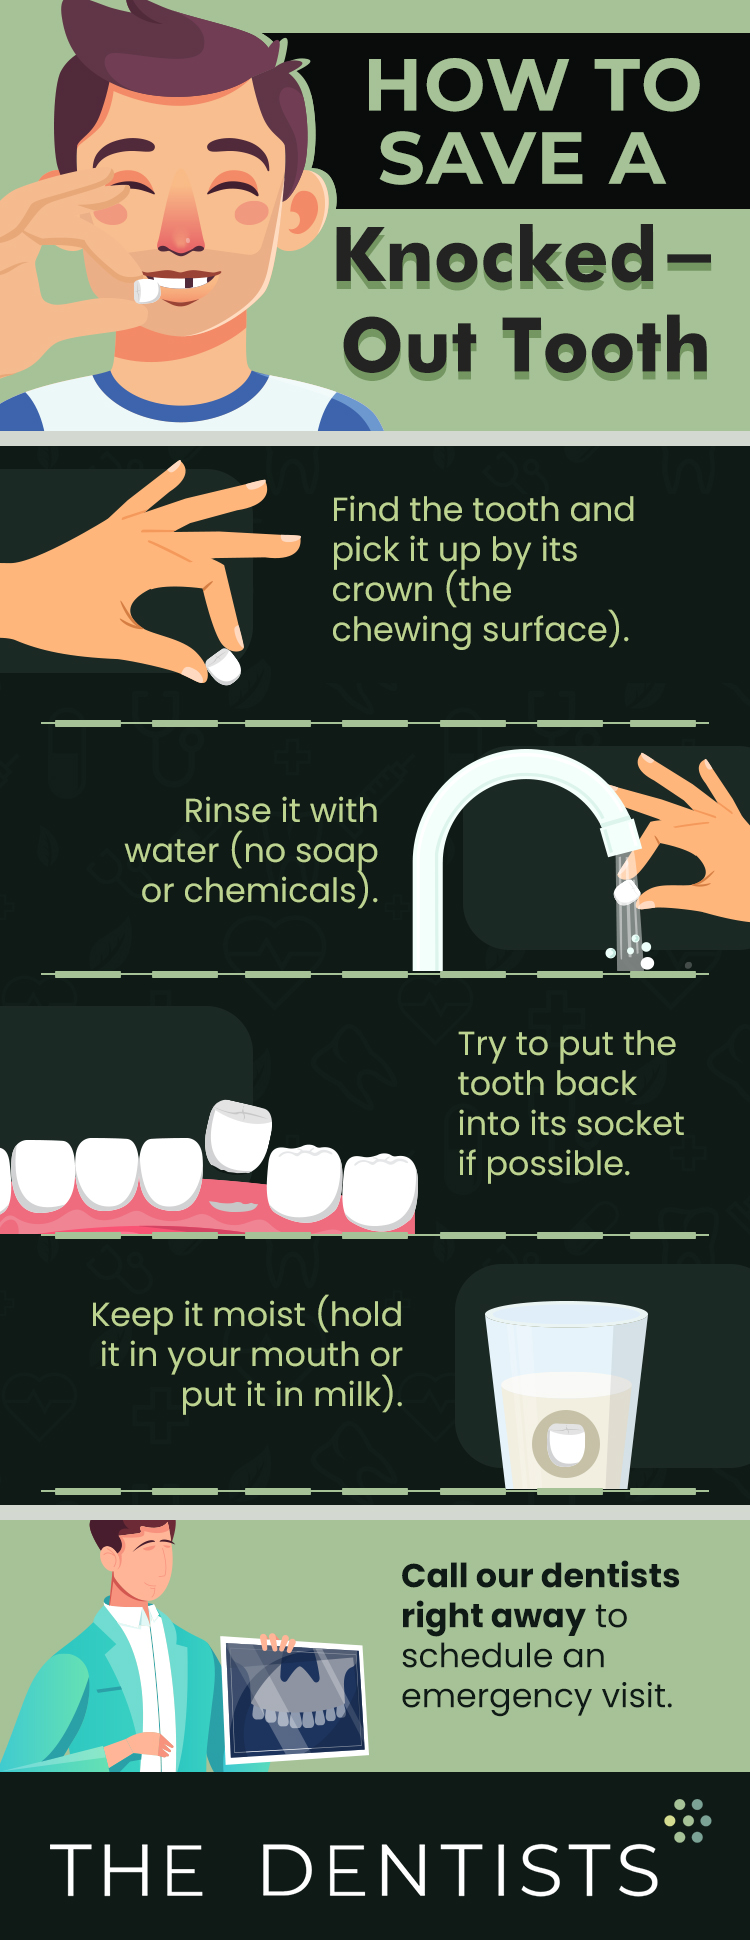 Knocked-Out Tooth? Here’s How to Save Your Smile